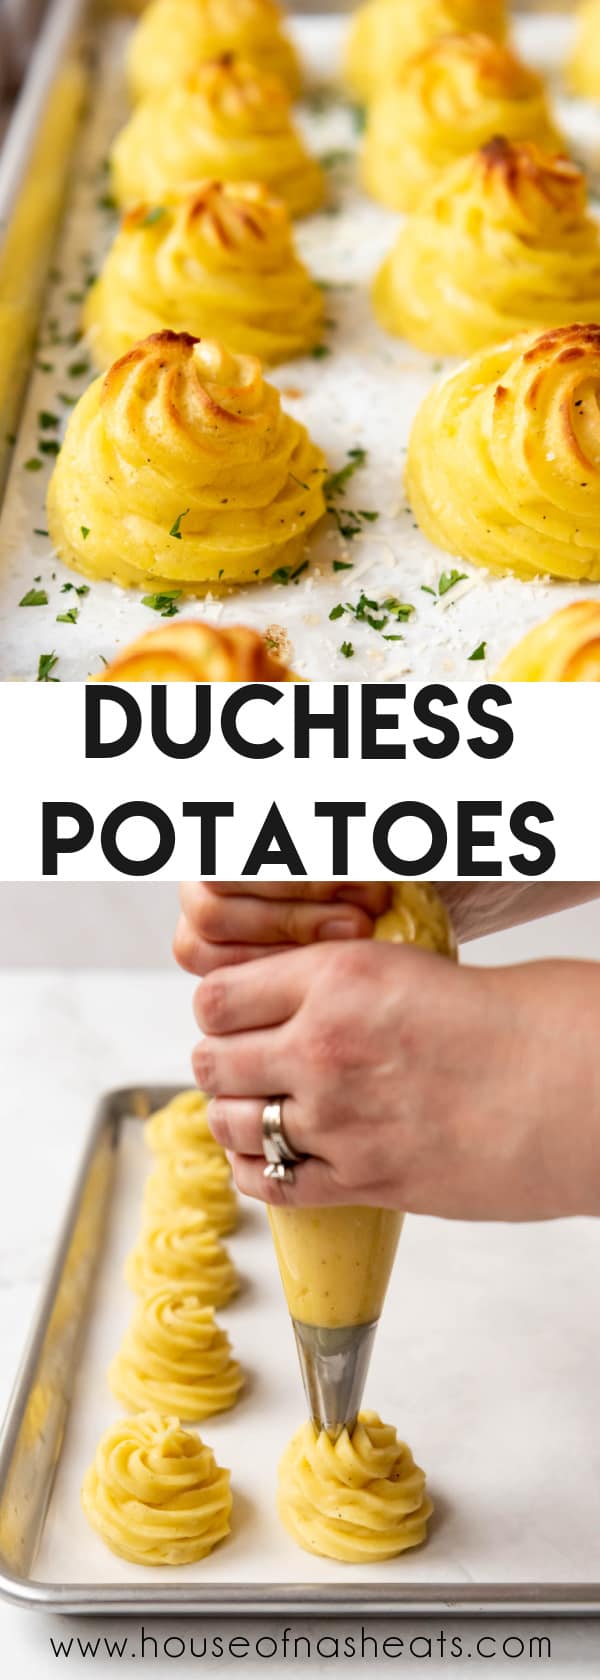 A collage of images of duchess potatoes with text overlay.